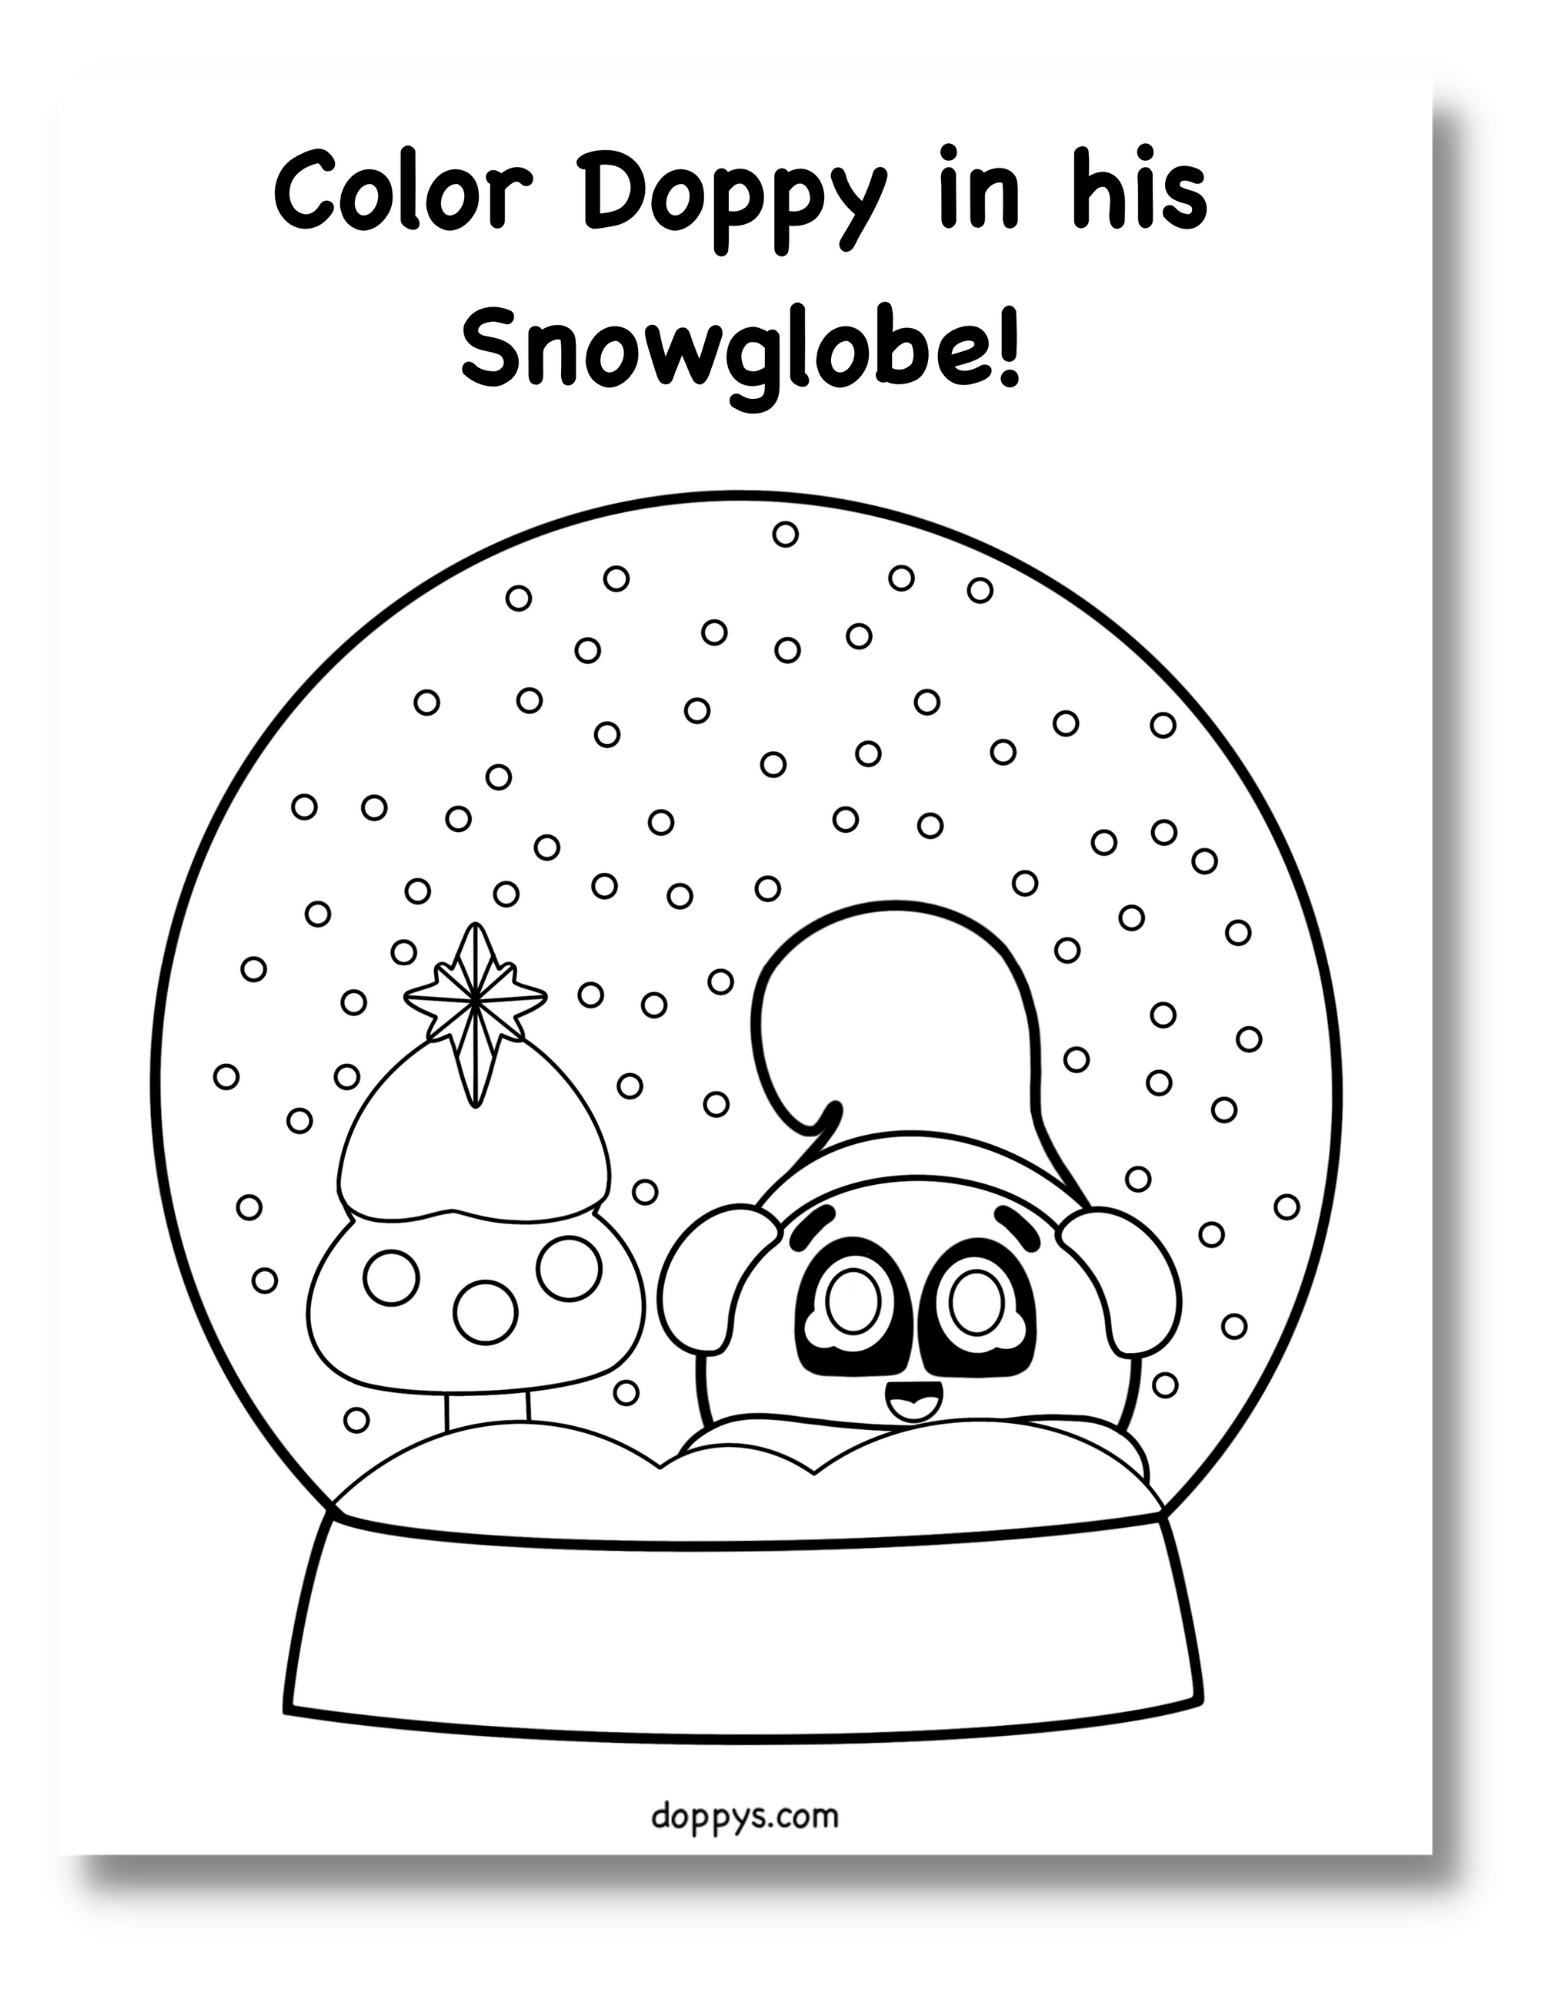 Christmas coloring page for kids doppy in a snow globe â